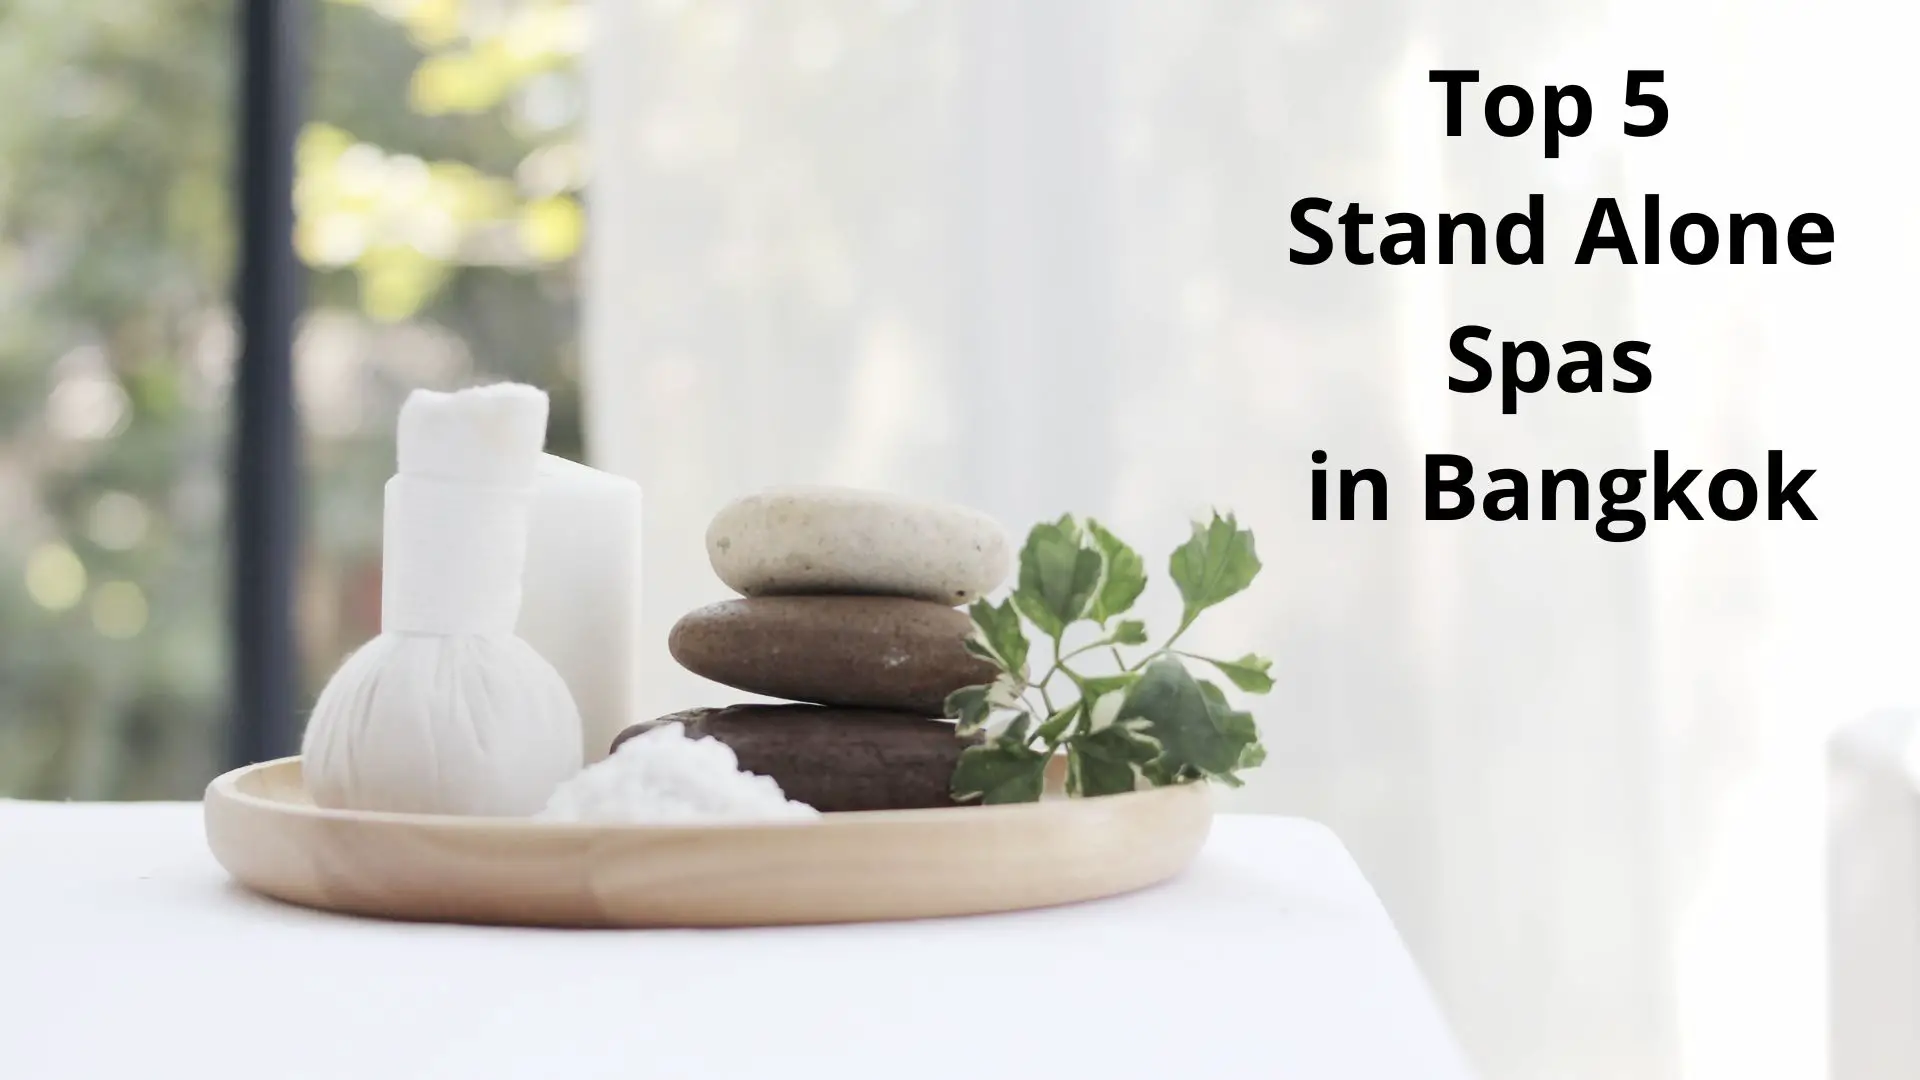 Top 5 Stand Alone Spas in Bangkok